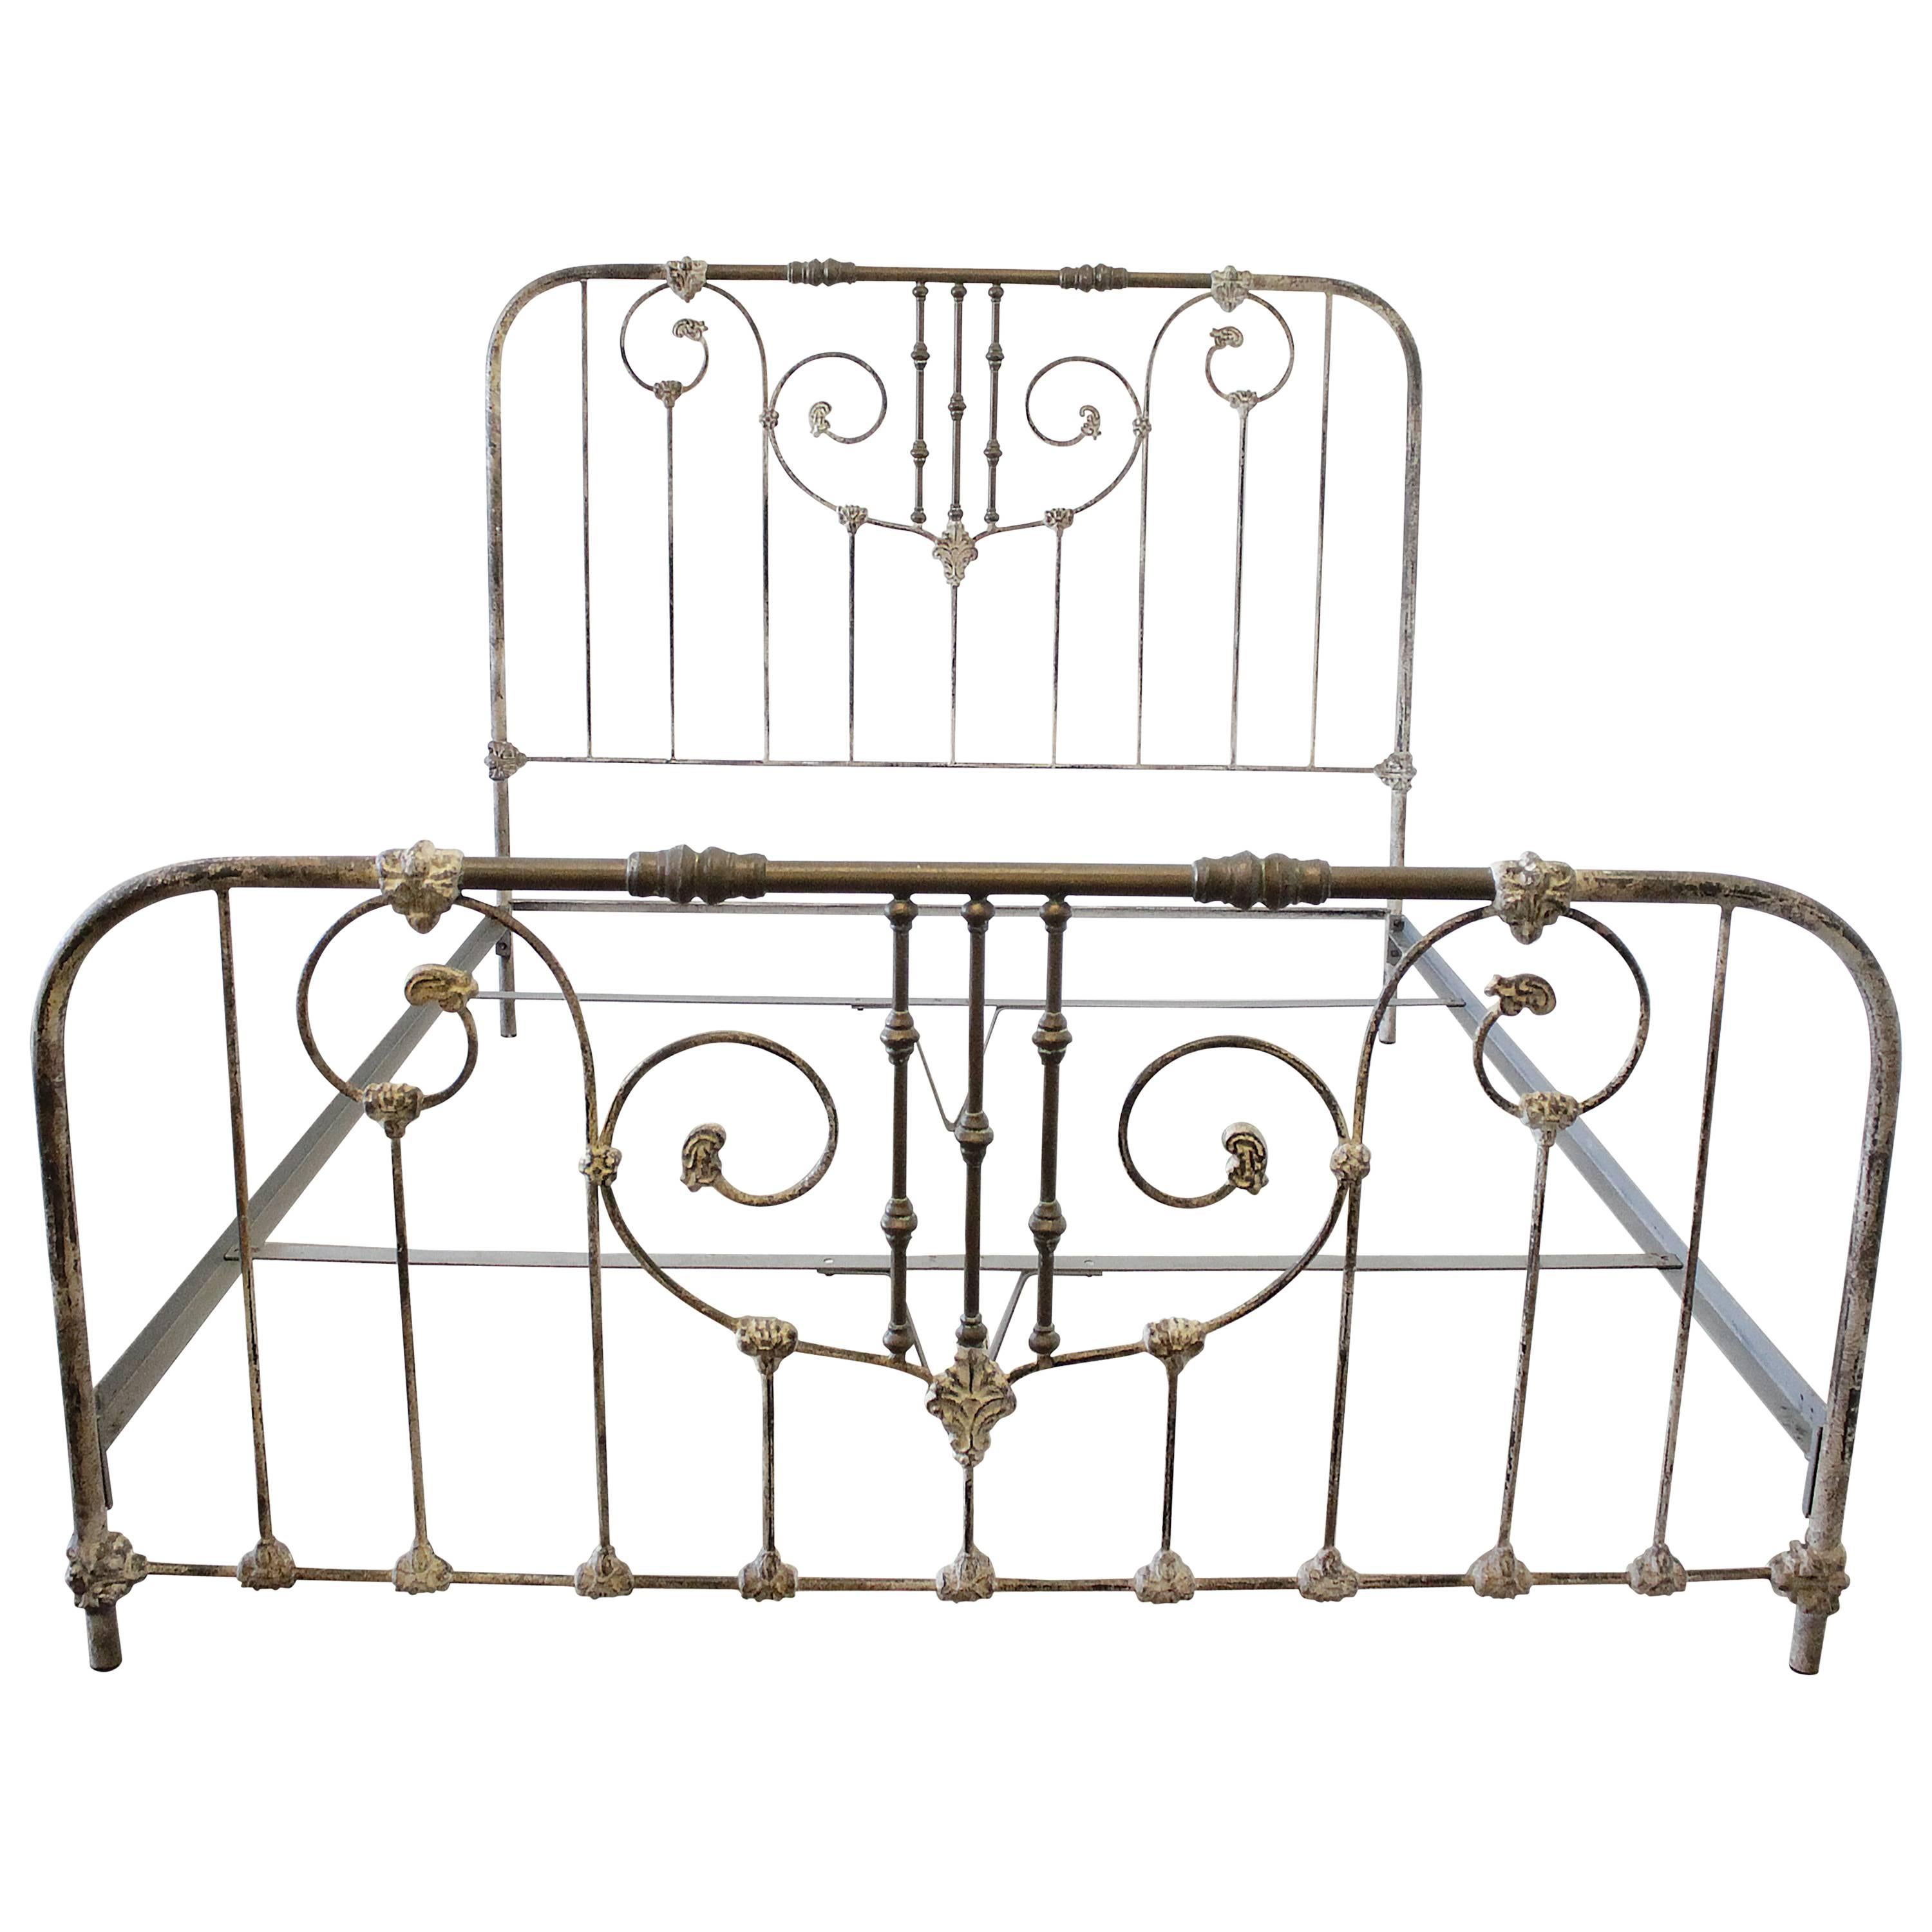 Vintage King-Size Parisian Style Iron Bed with Distressed Paint Finish